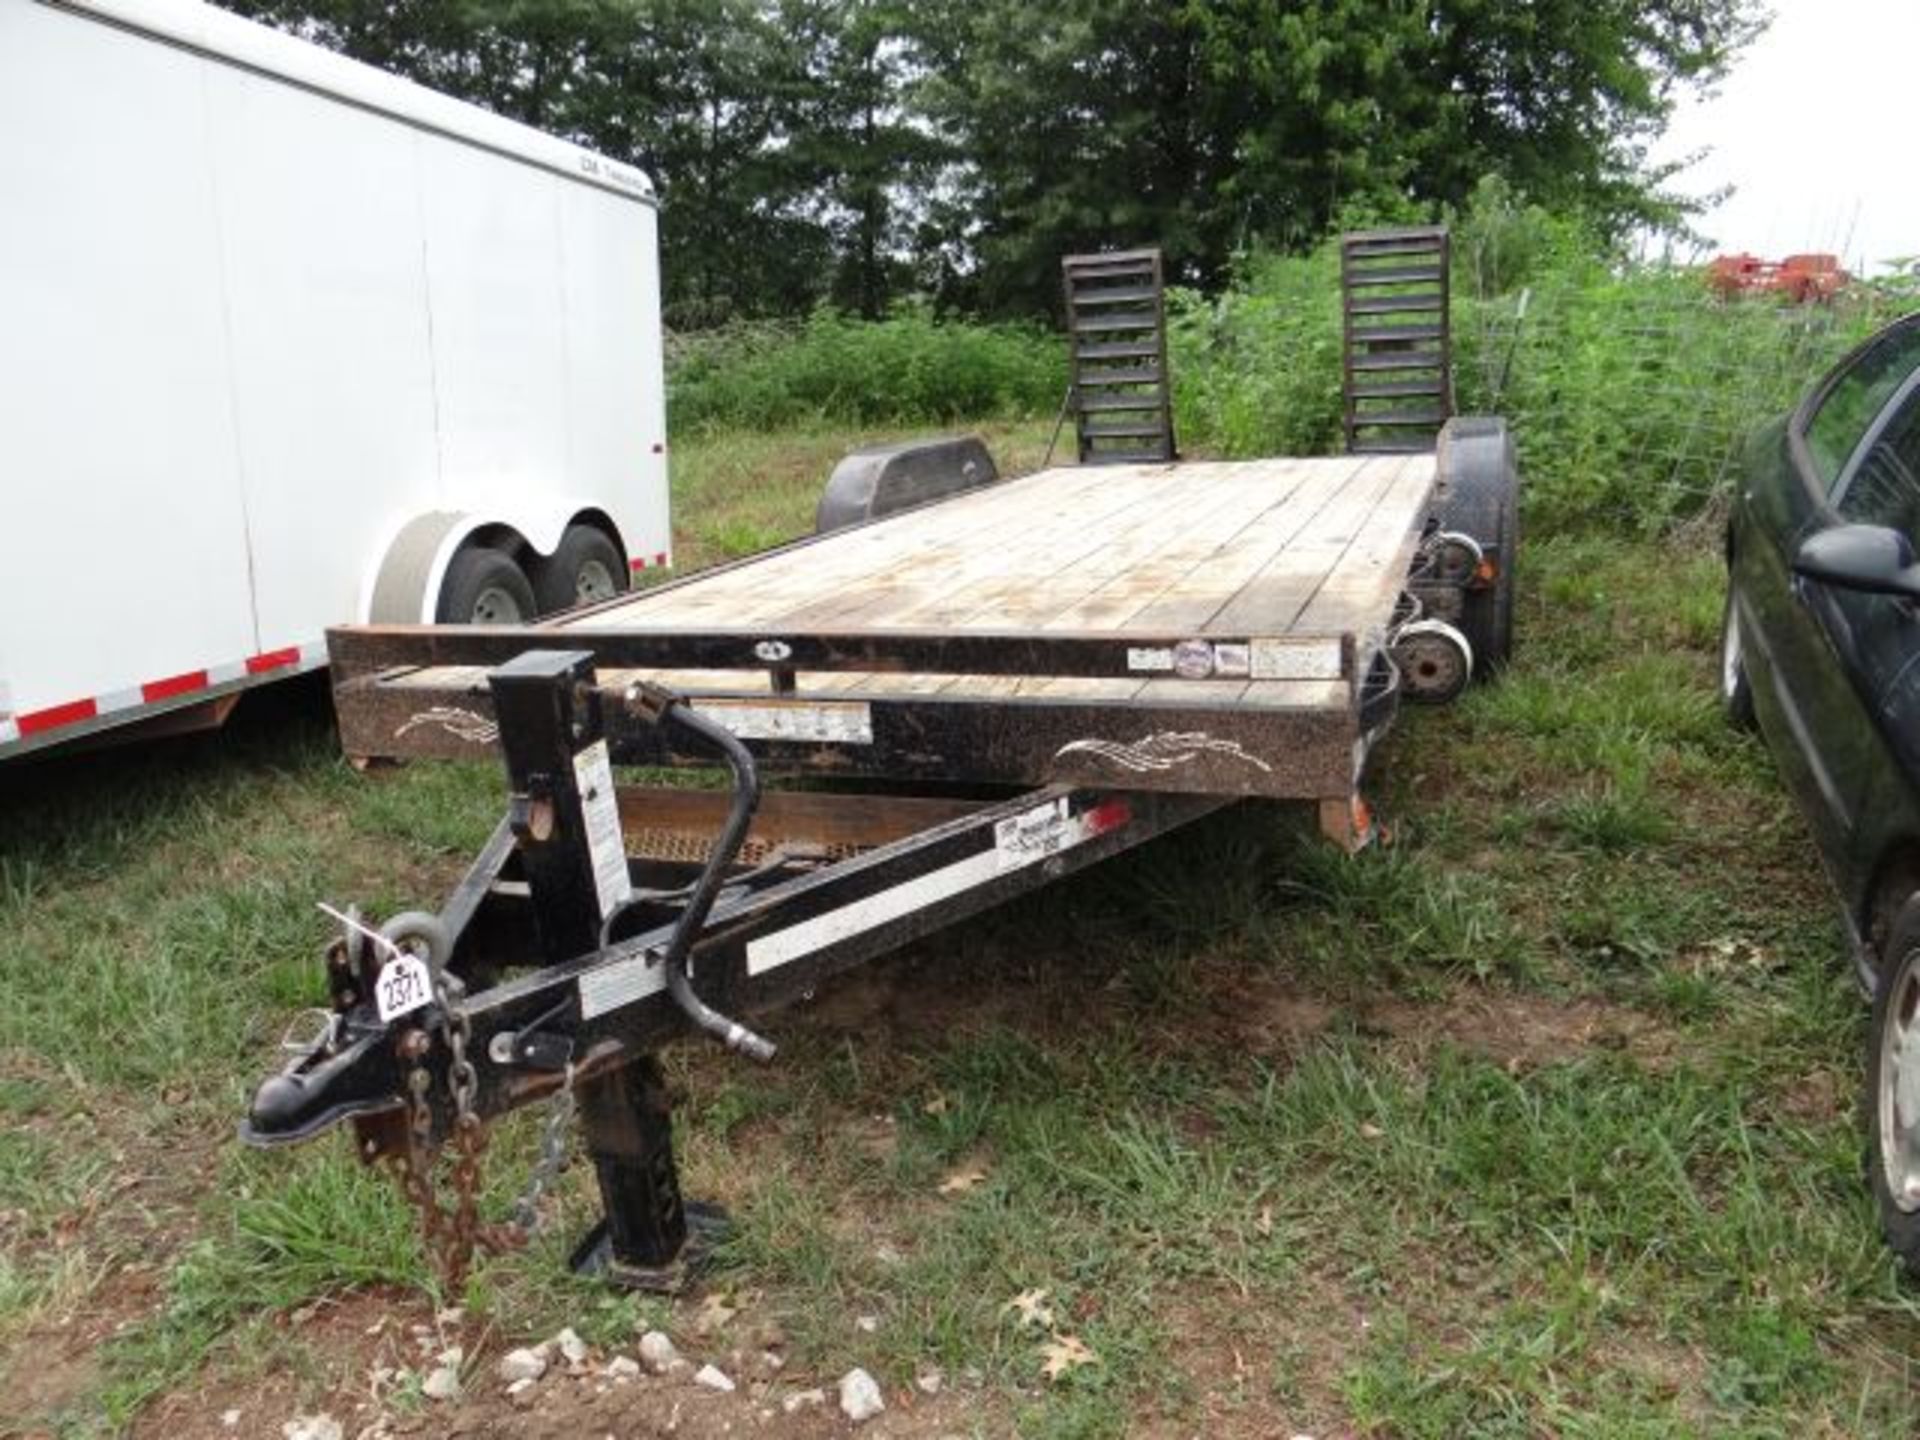 2011 Trailerman Flatbed Trailer 16', 7000# Axles, 4 New Tires, Ramps, Title in the Office